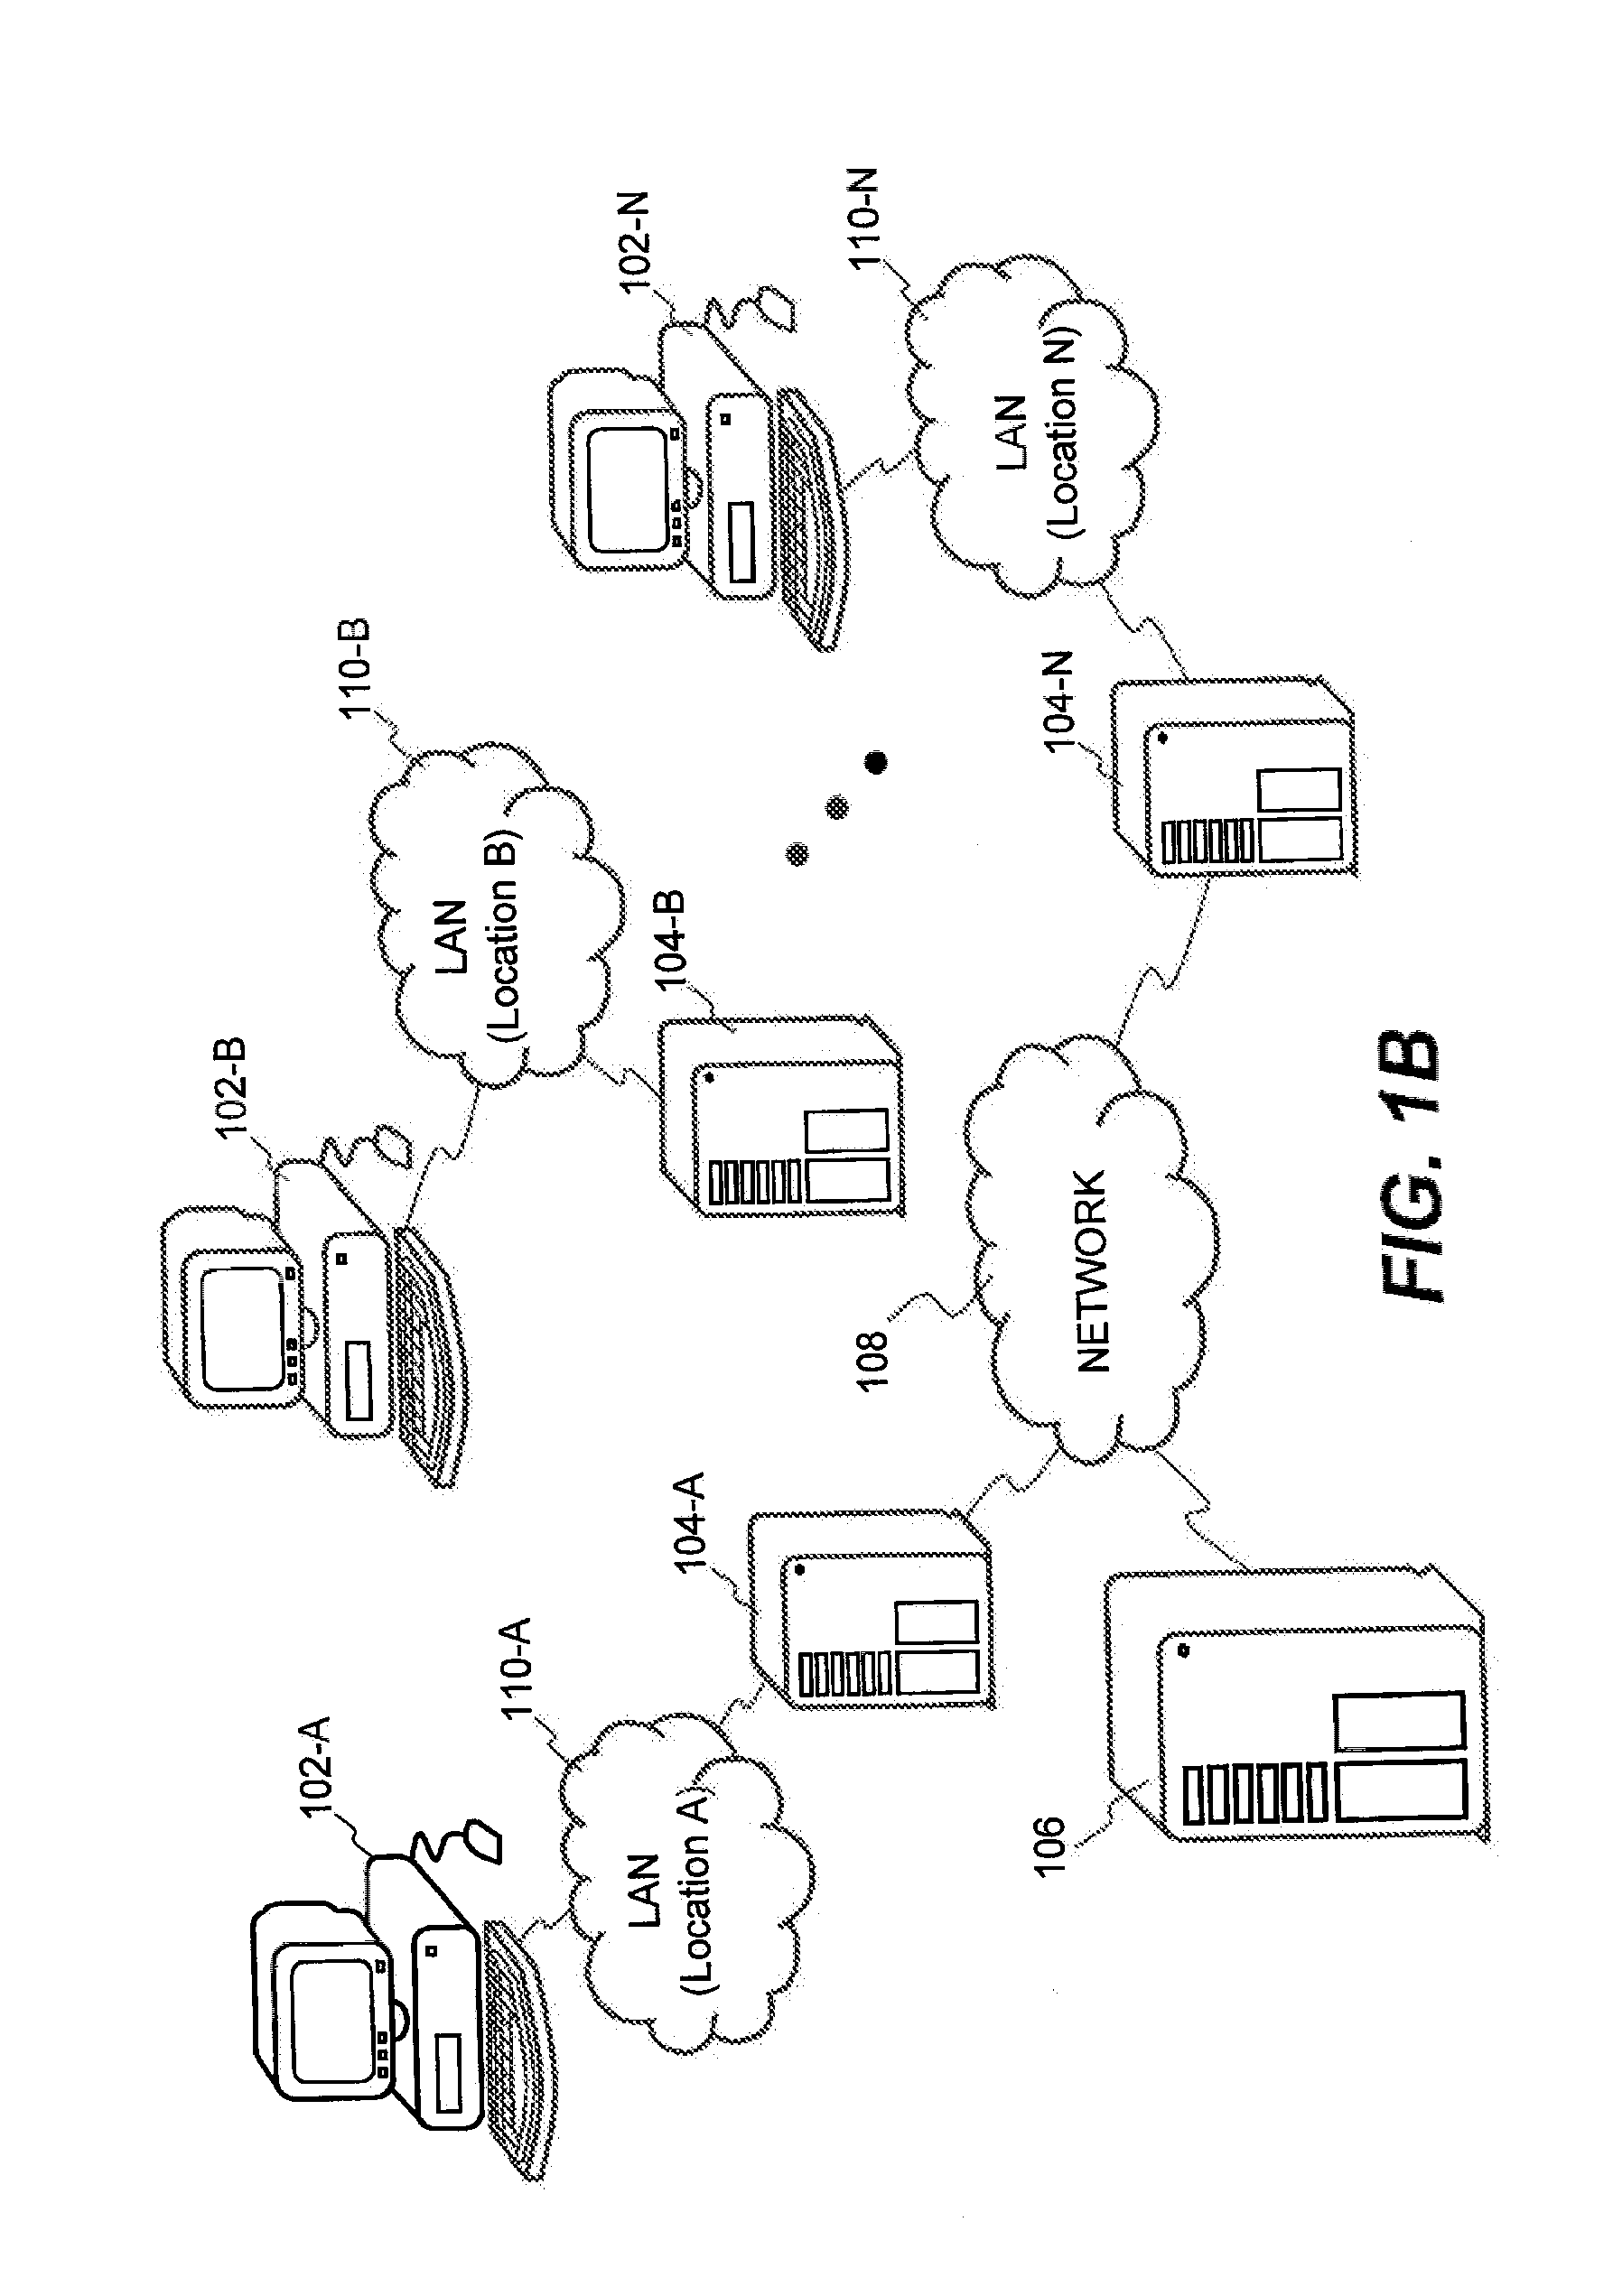 System and Method for Providing Multi-Location Access Management to Secured Items